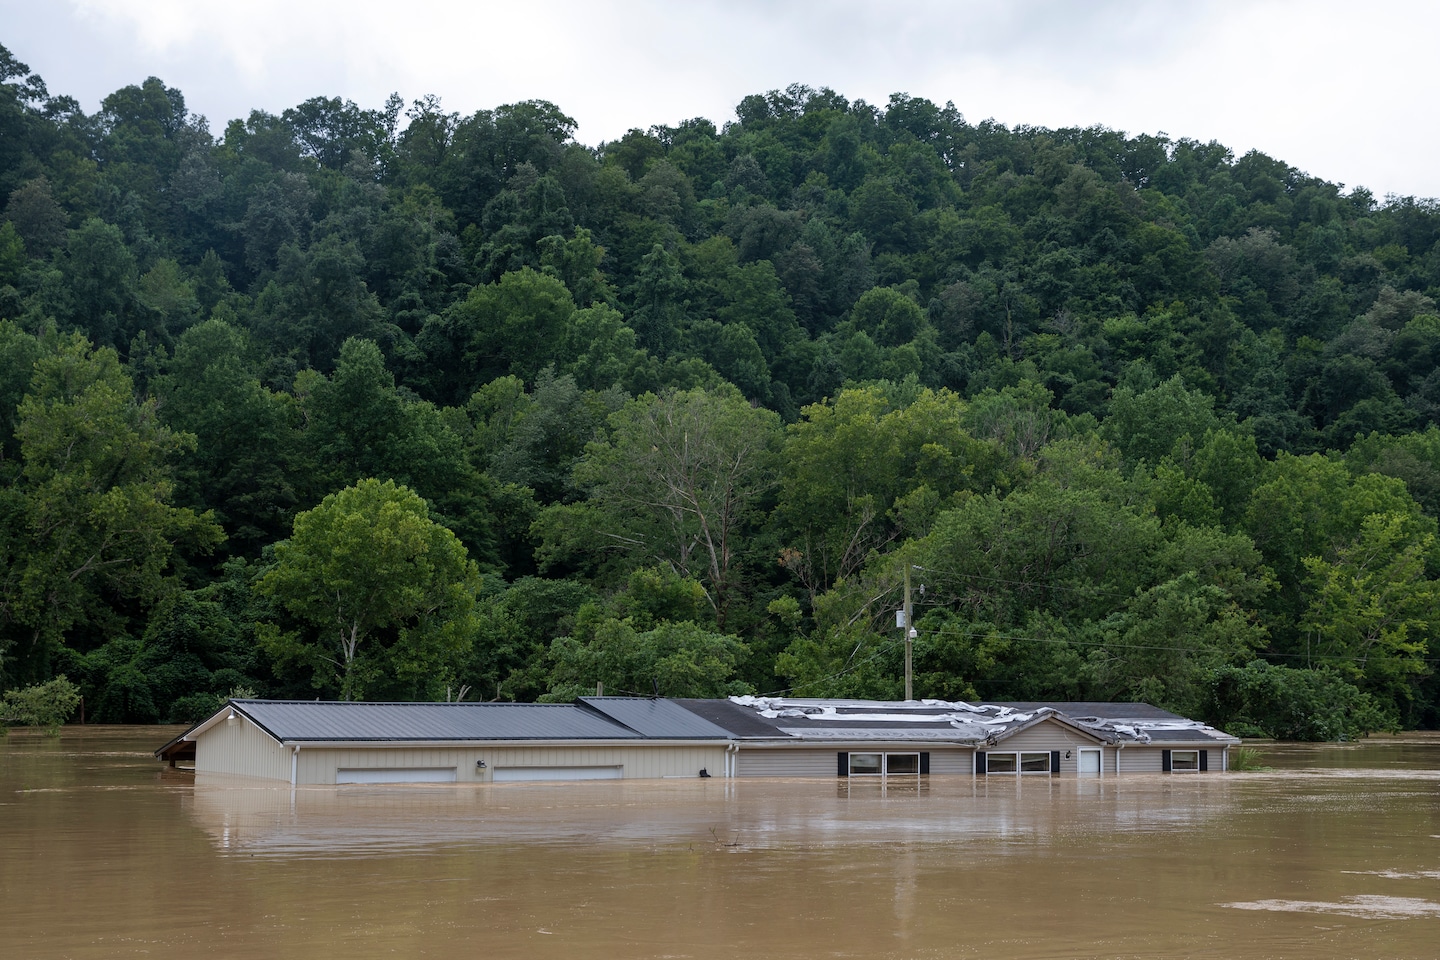 St. Louis and Kentucky floods: How climate change intensified them - The Washington Post